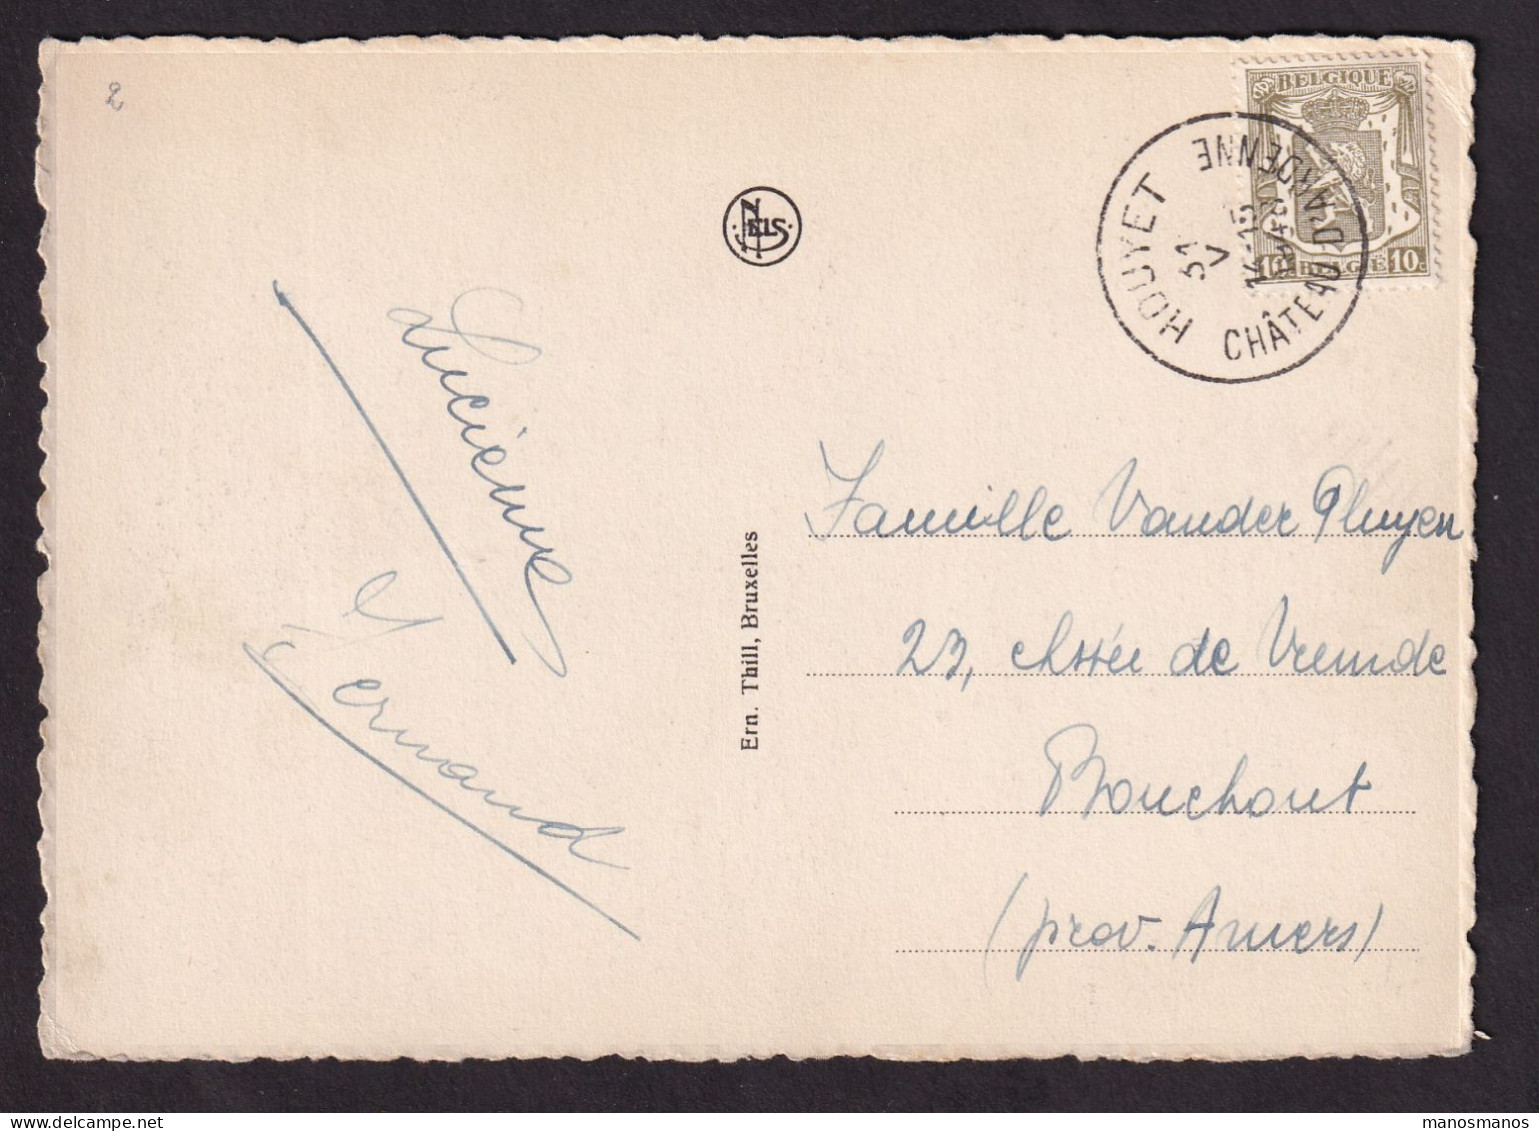 DDFF 895 -- Chateau D Ardenne à HOUYET - Carte-Vue TP Petit Sceau Cachet HOUYET CHATEAU D' ARDENNE 1948 - 1935-1949 Small Seal Of The State